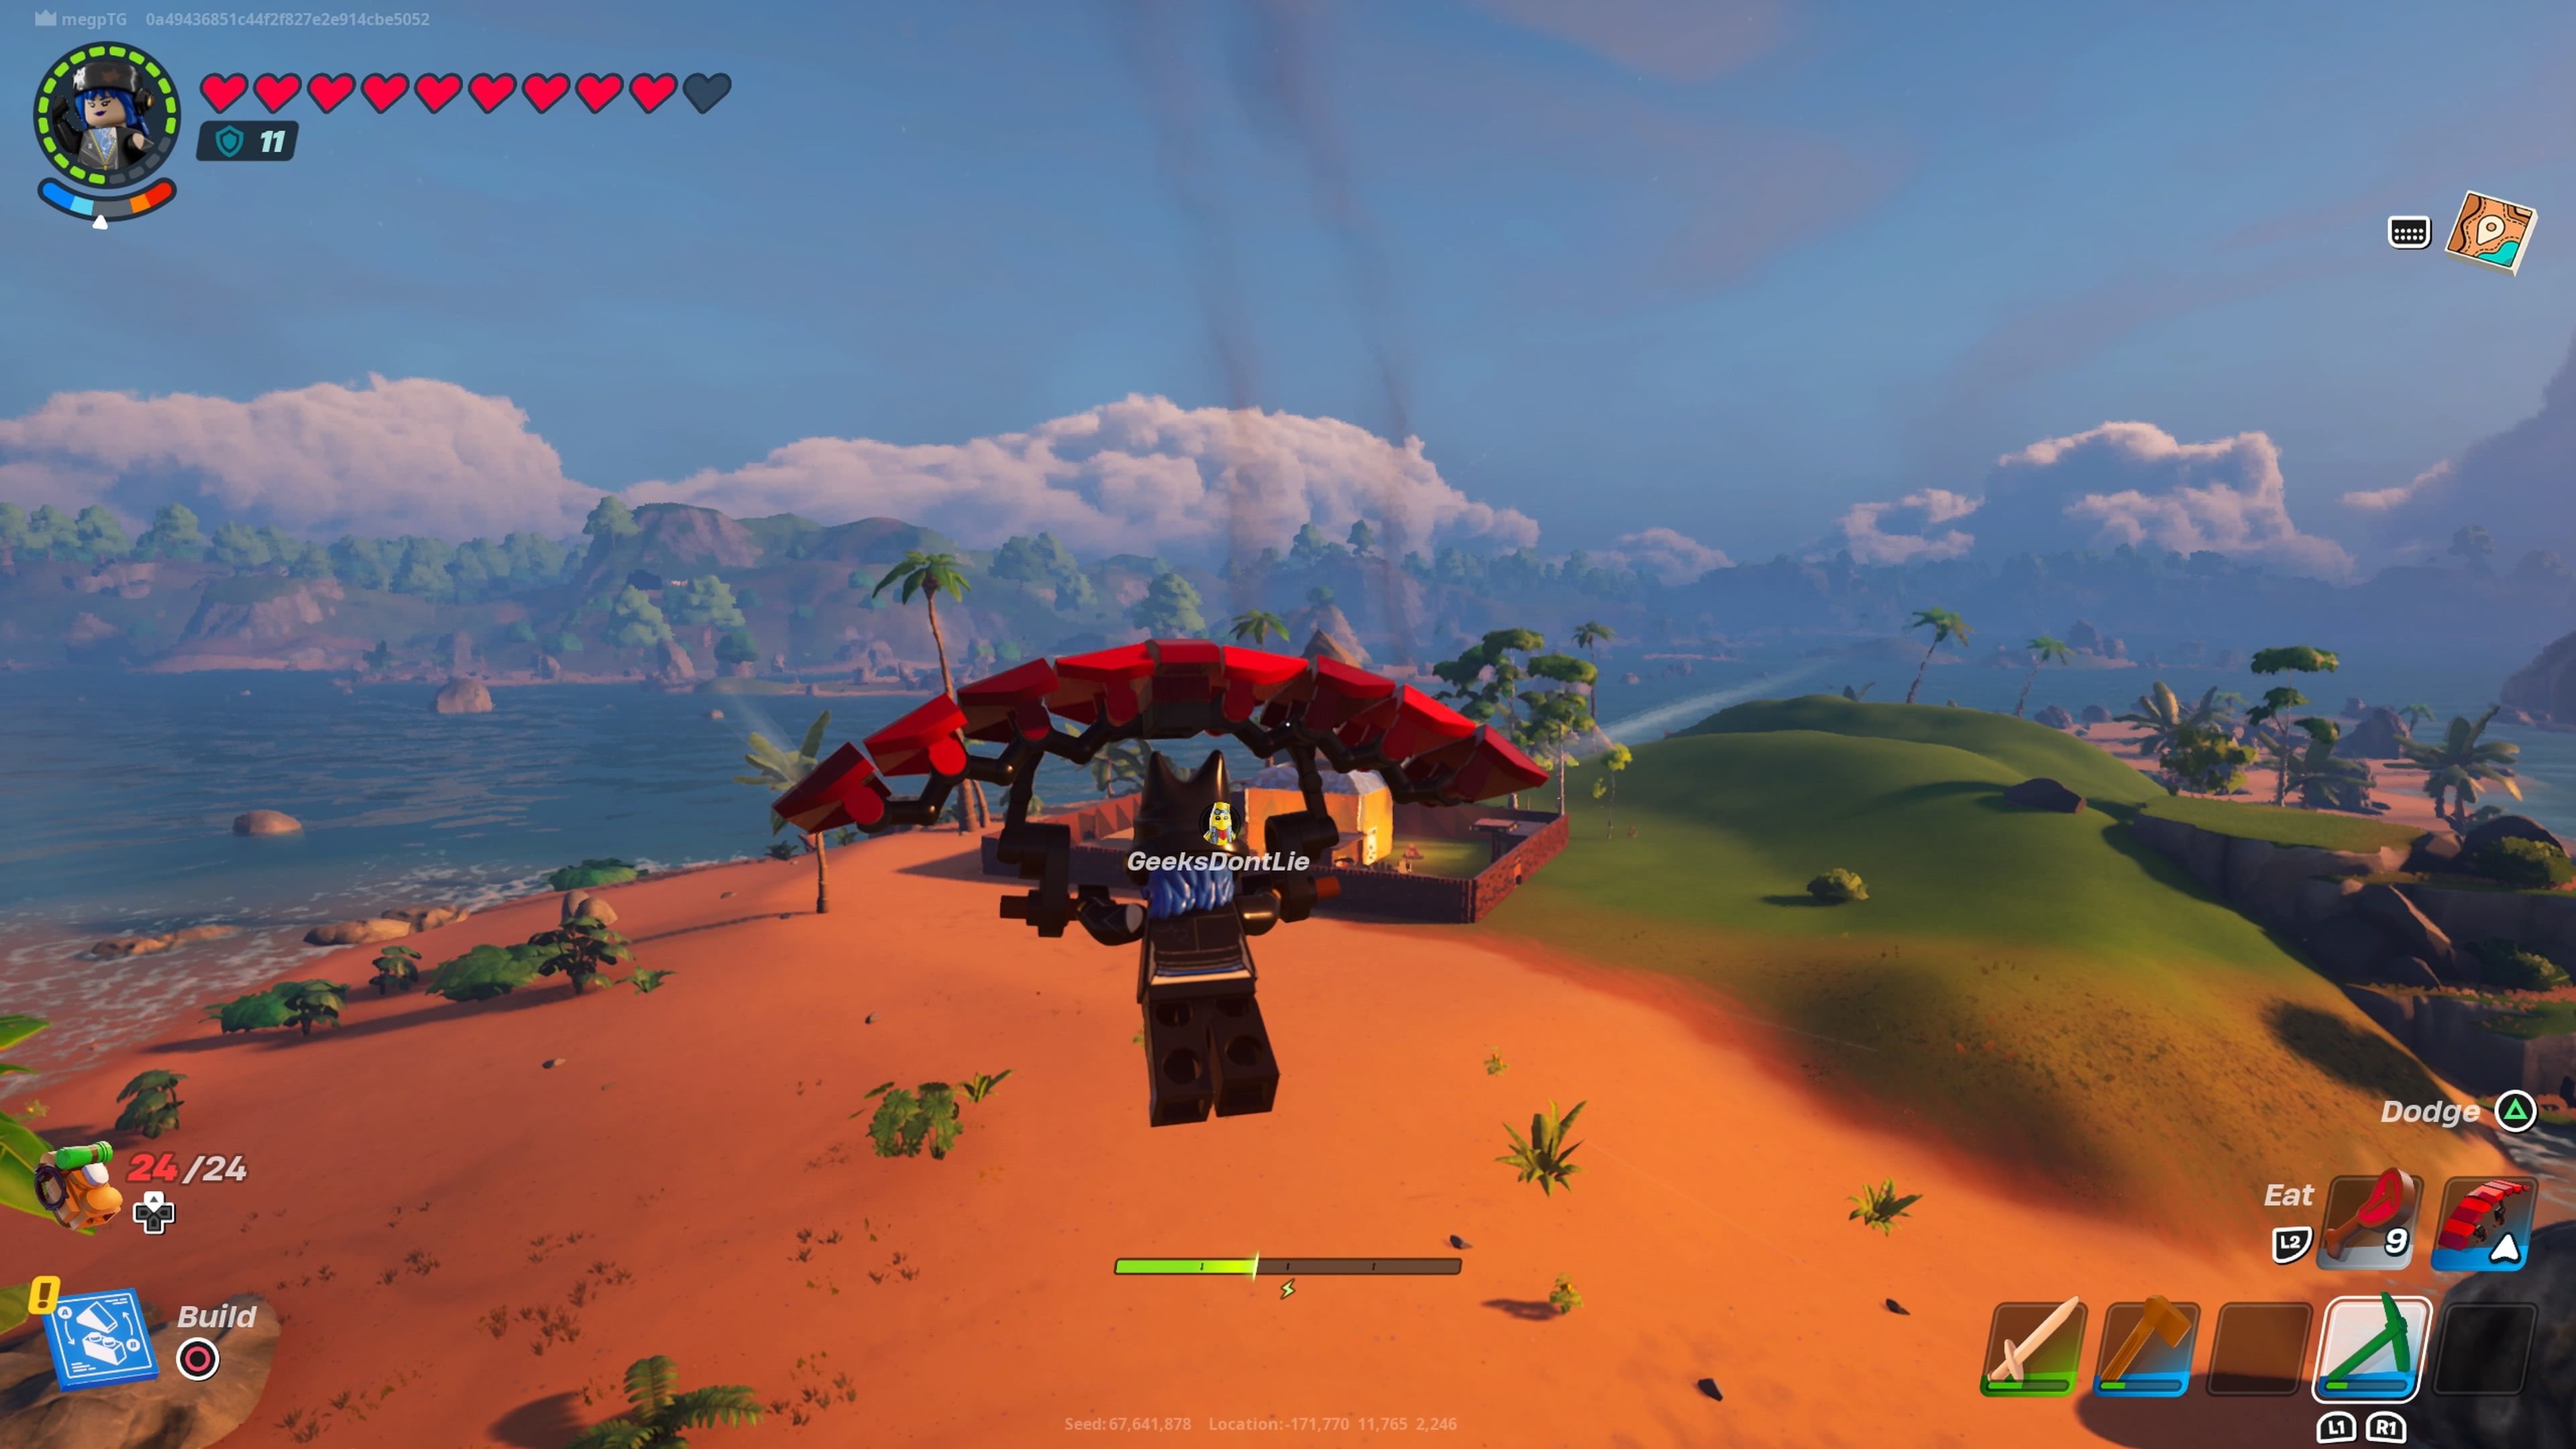 A player using a glider to travel over the Dry Valley in Lego Fortnite.